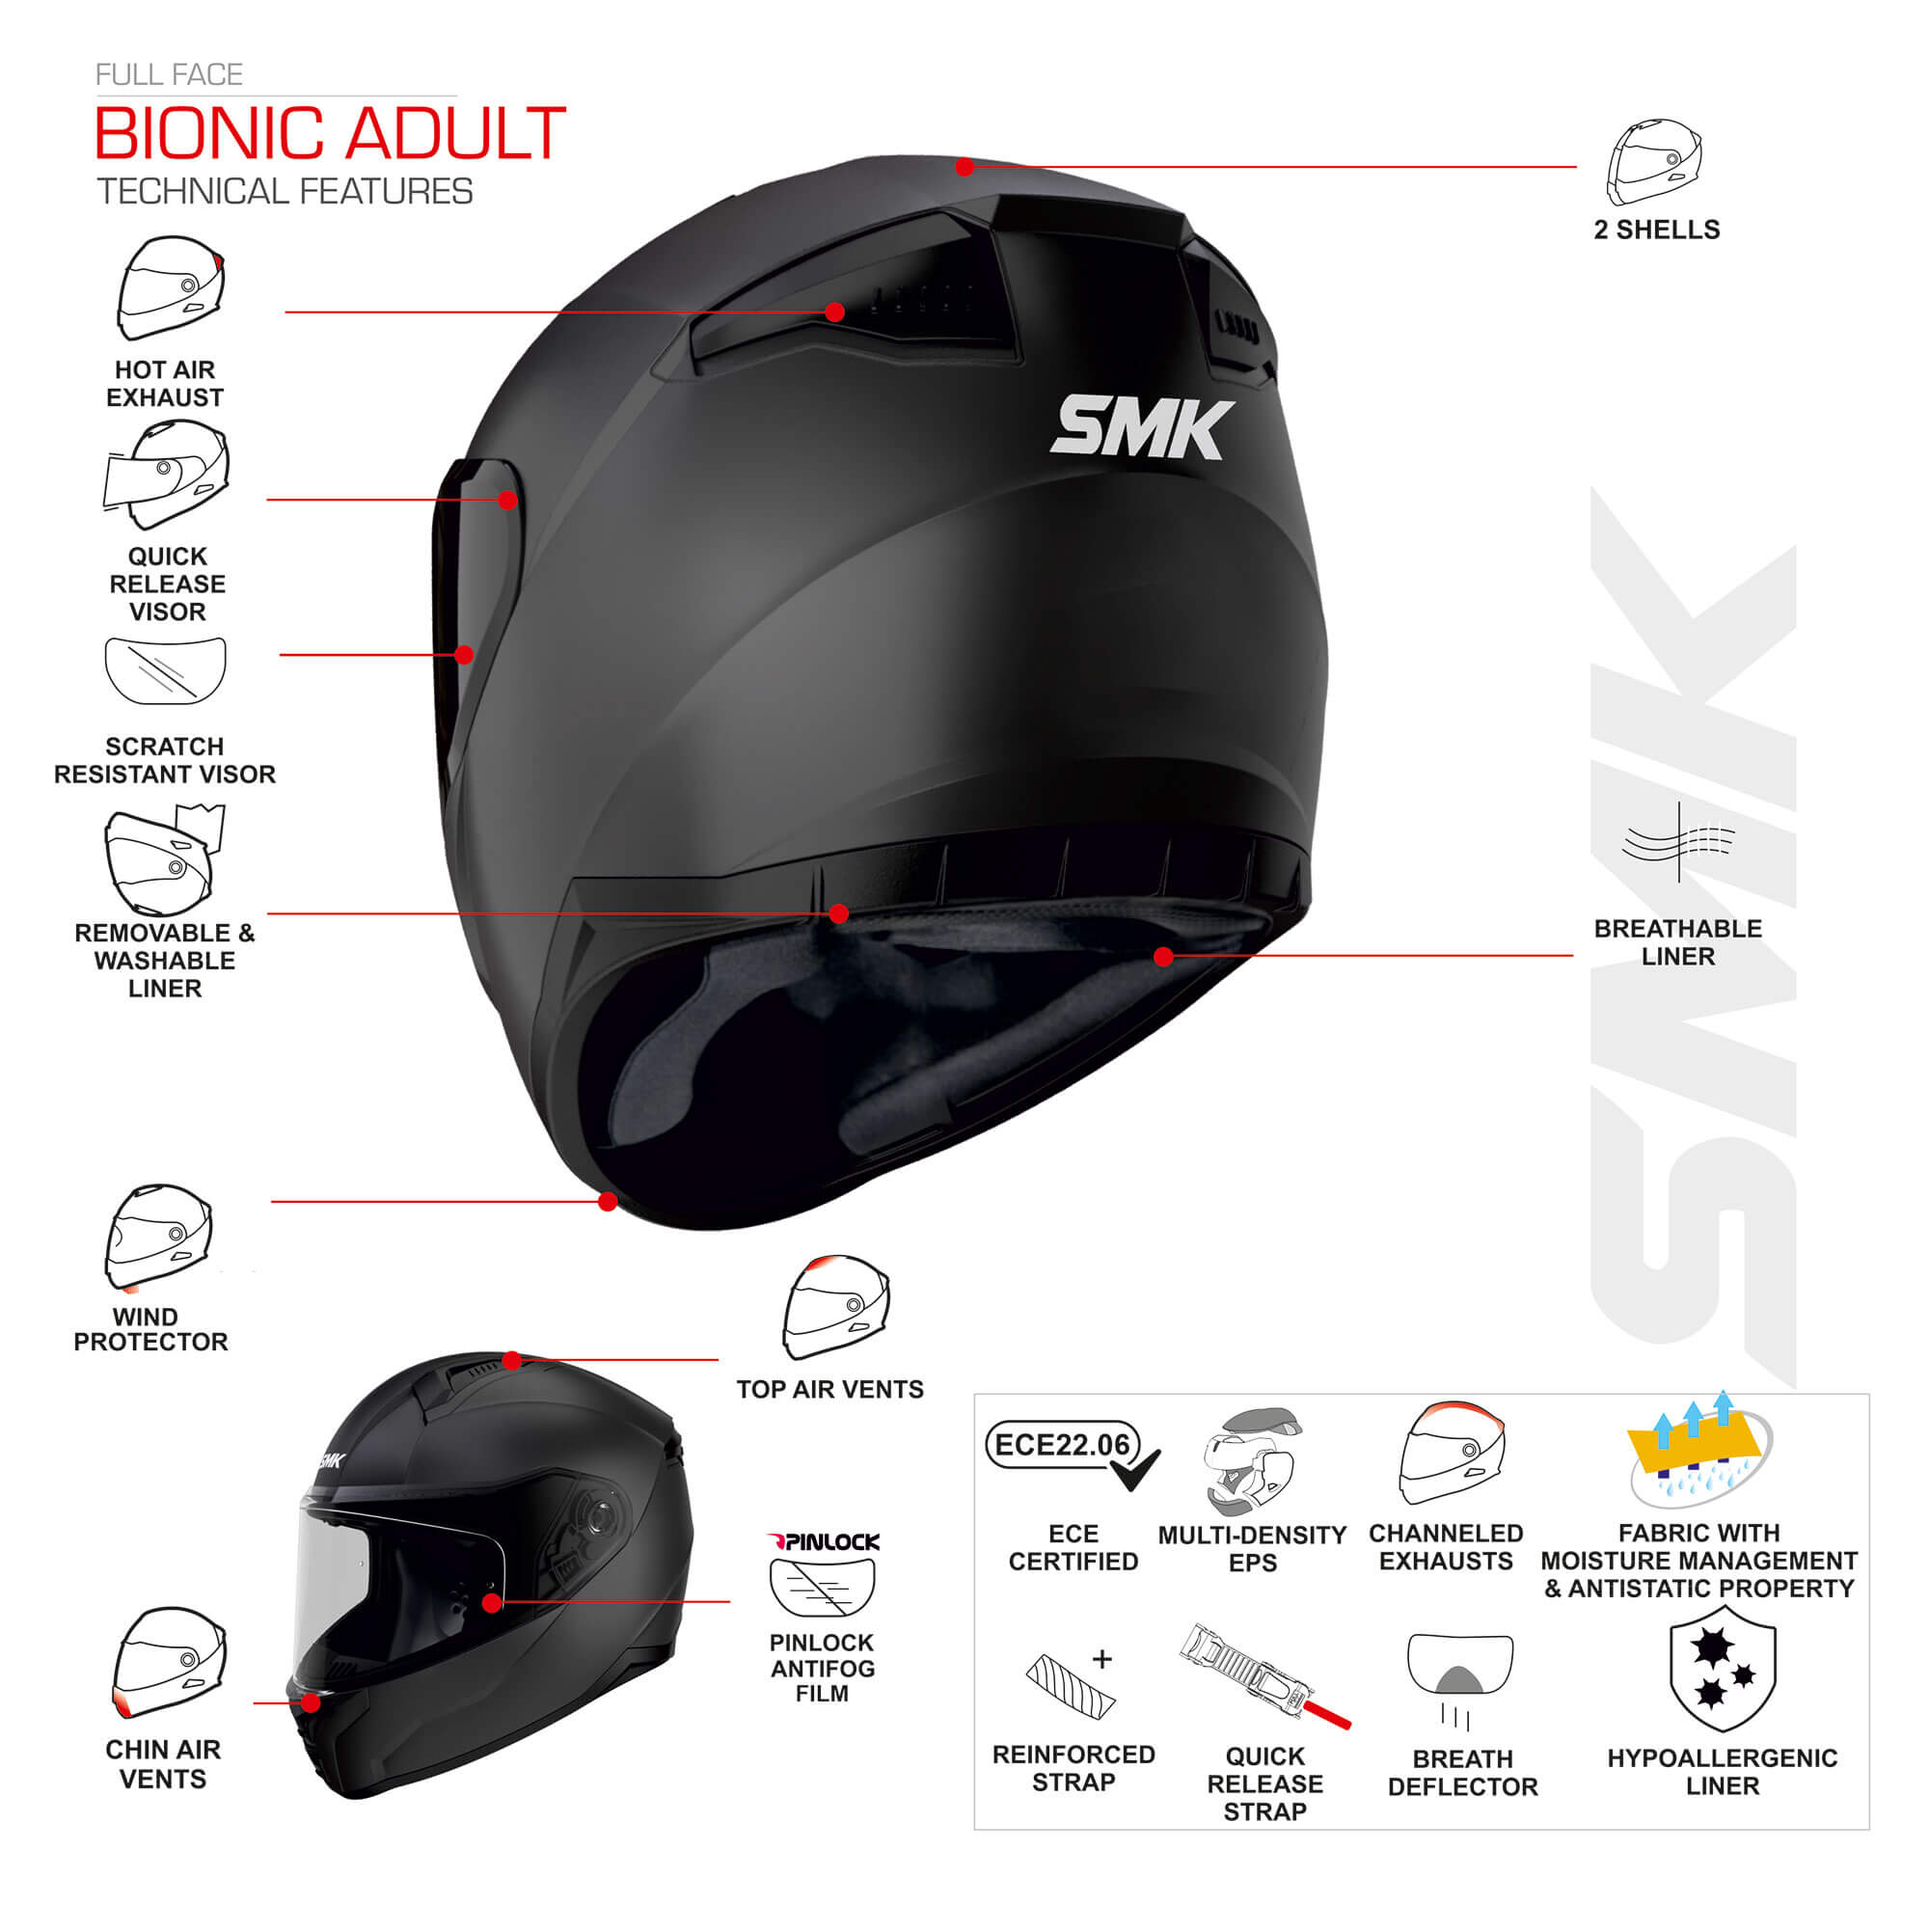 SMK Bionic Adult Features